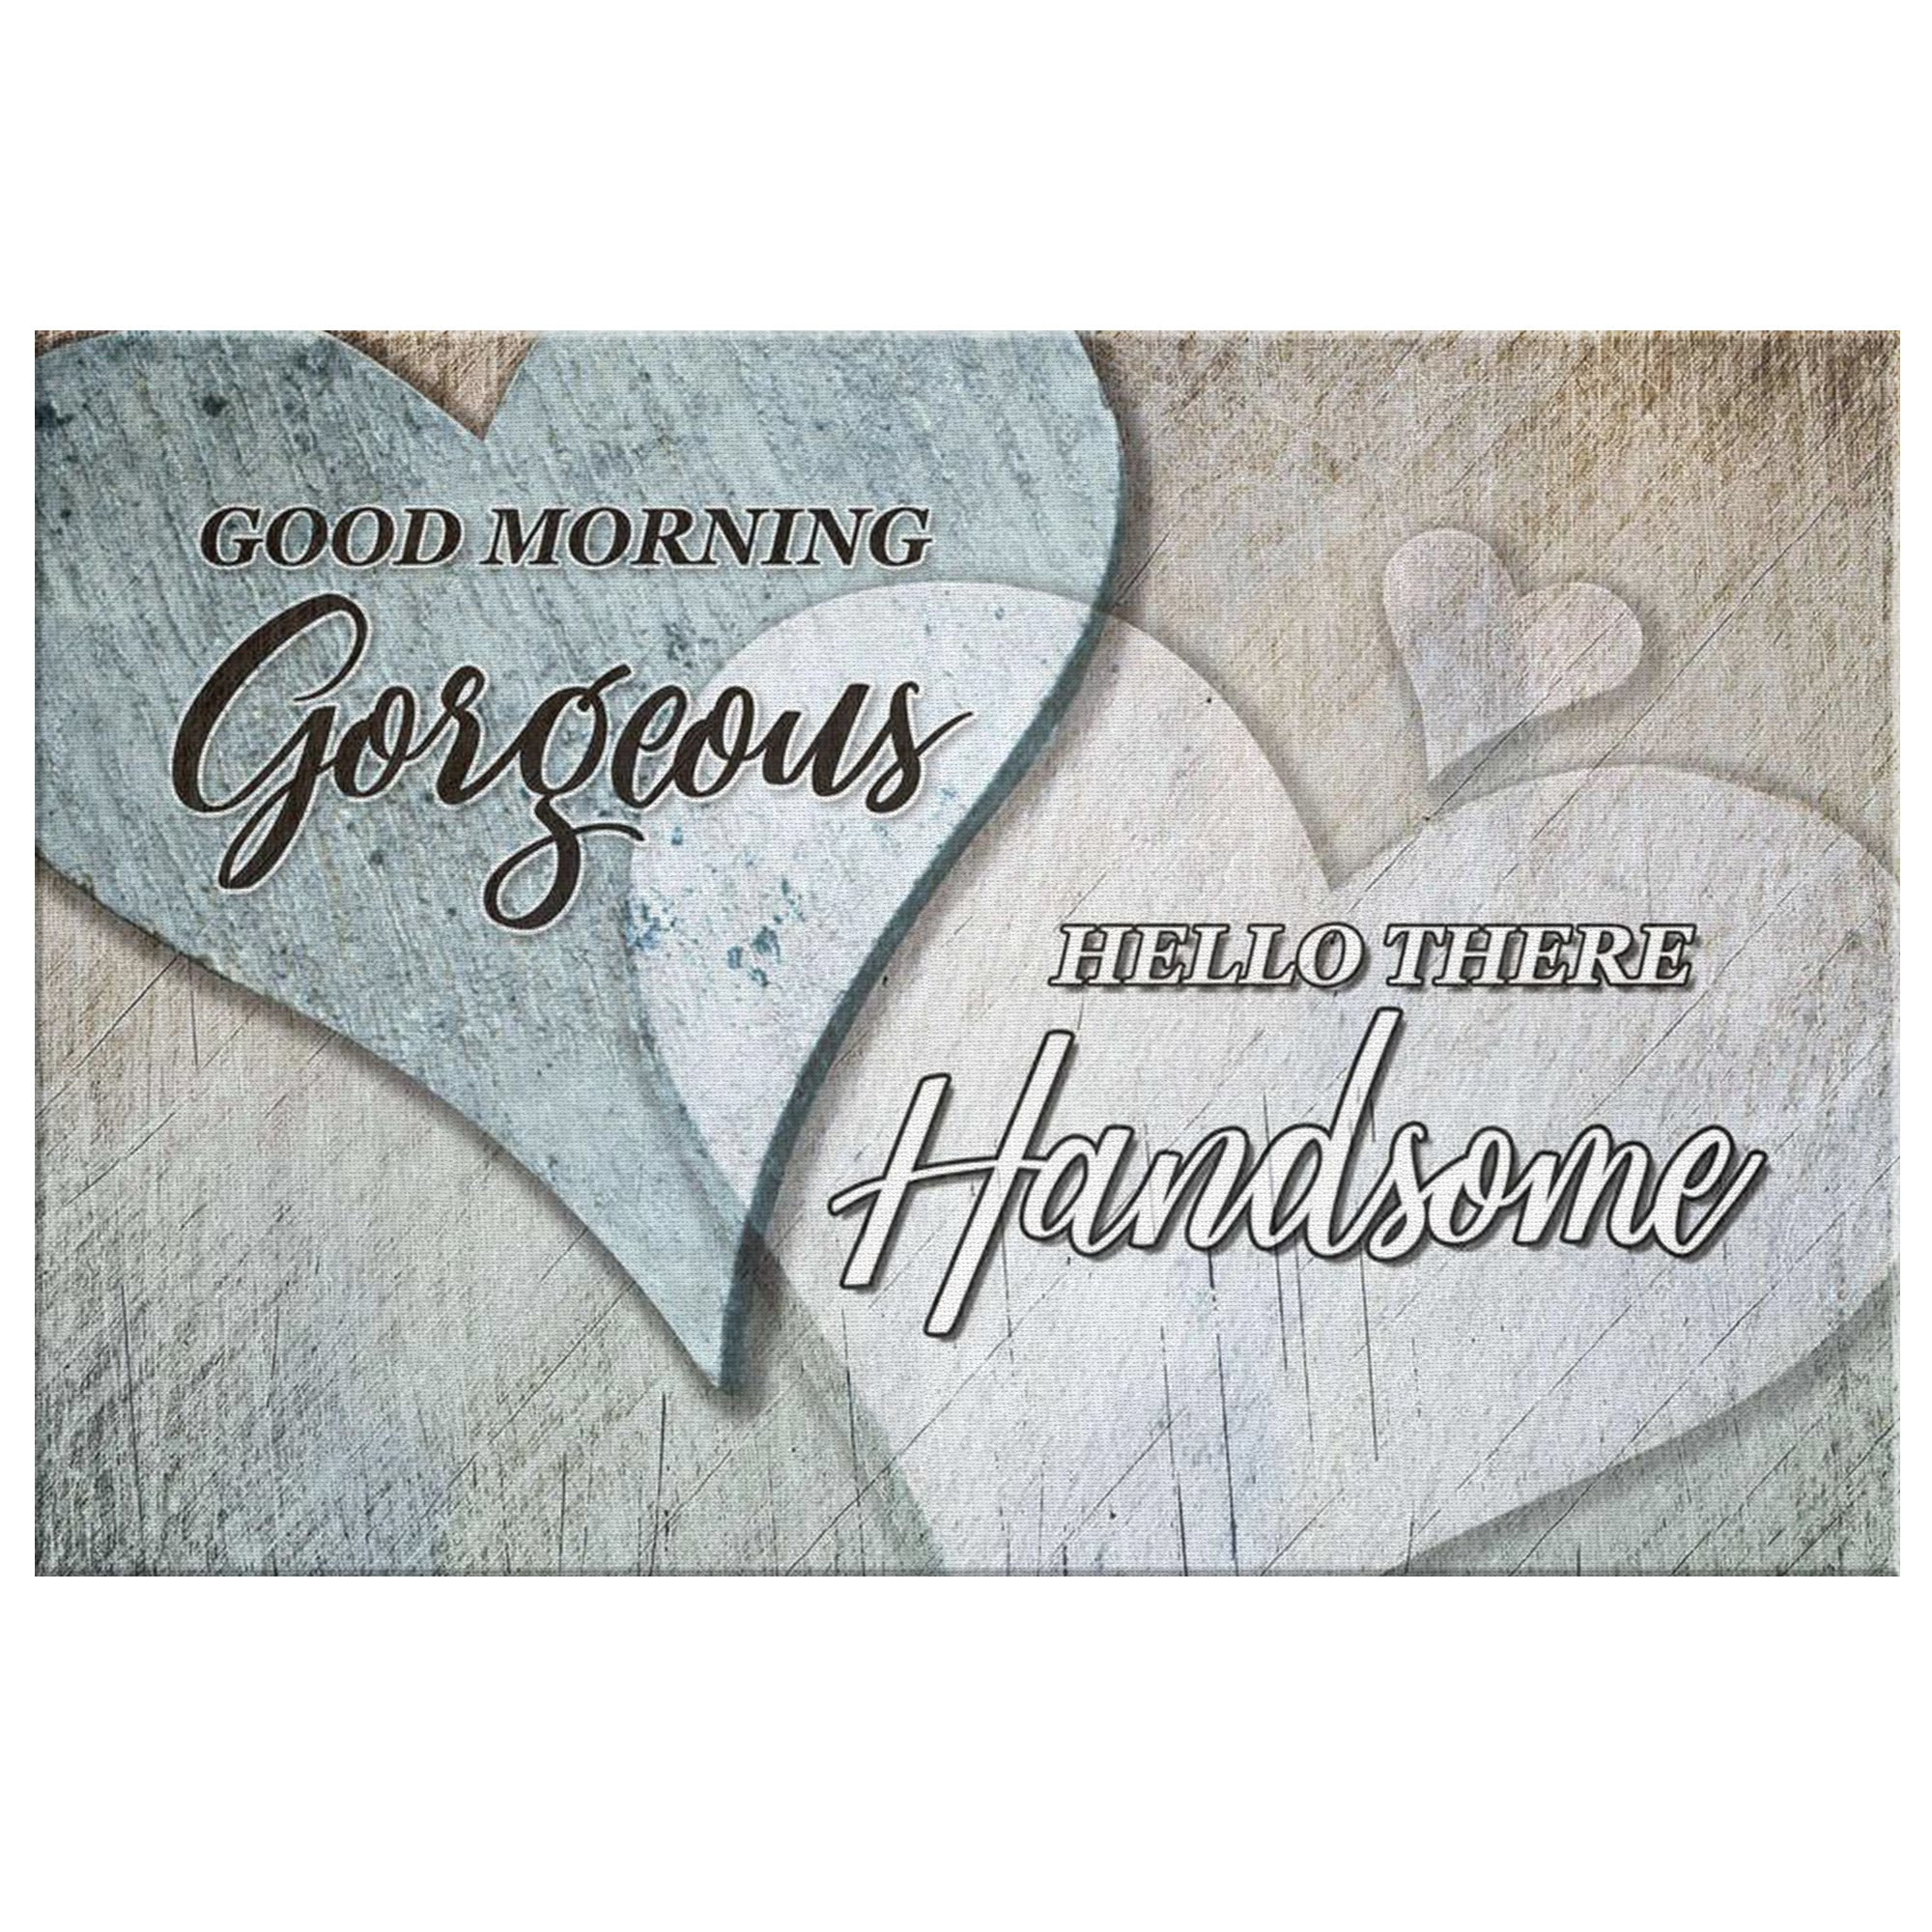 Good Morning Gorgeous - Hello There Handsome canvas wall art sign